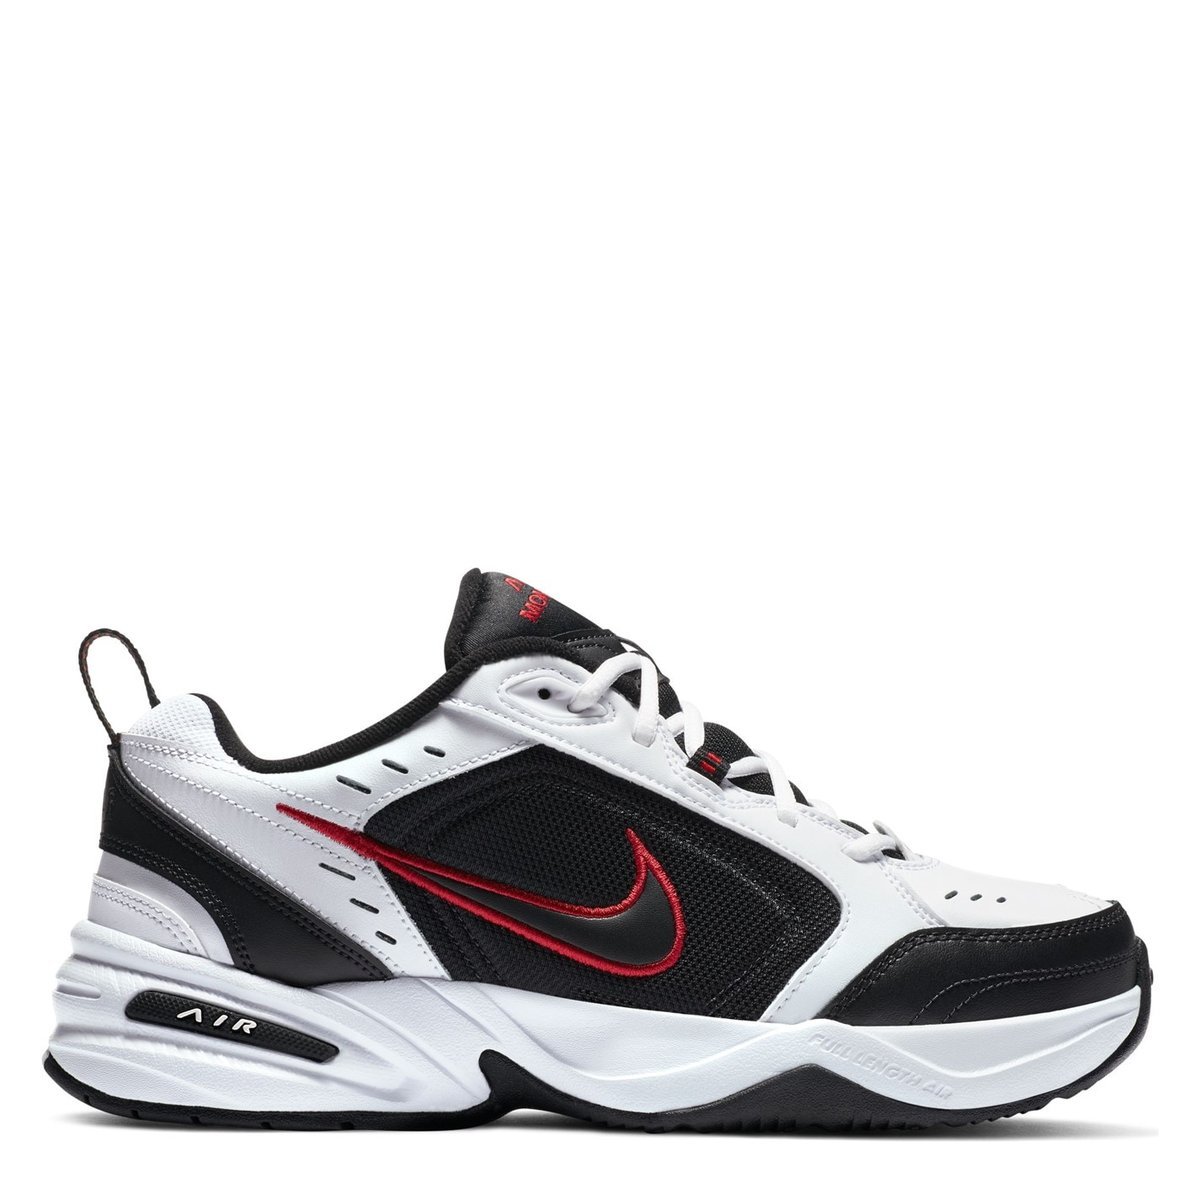 Size 13 Nike Nike Air Monarch IV Training Shoes Mens trainers